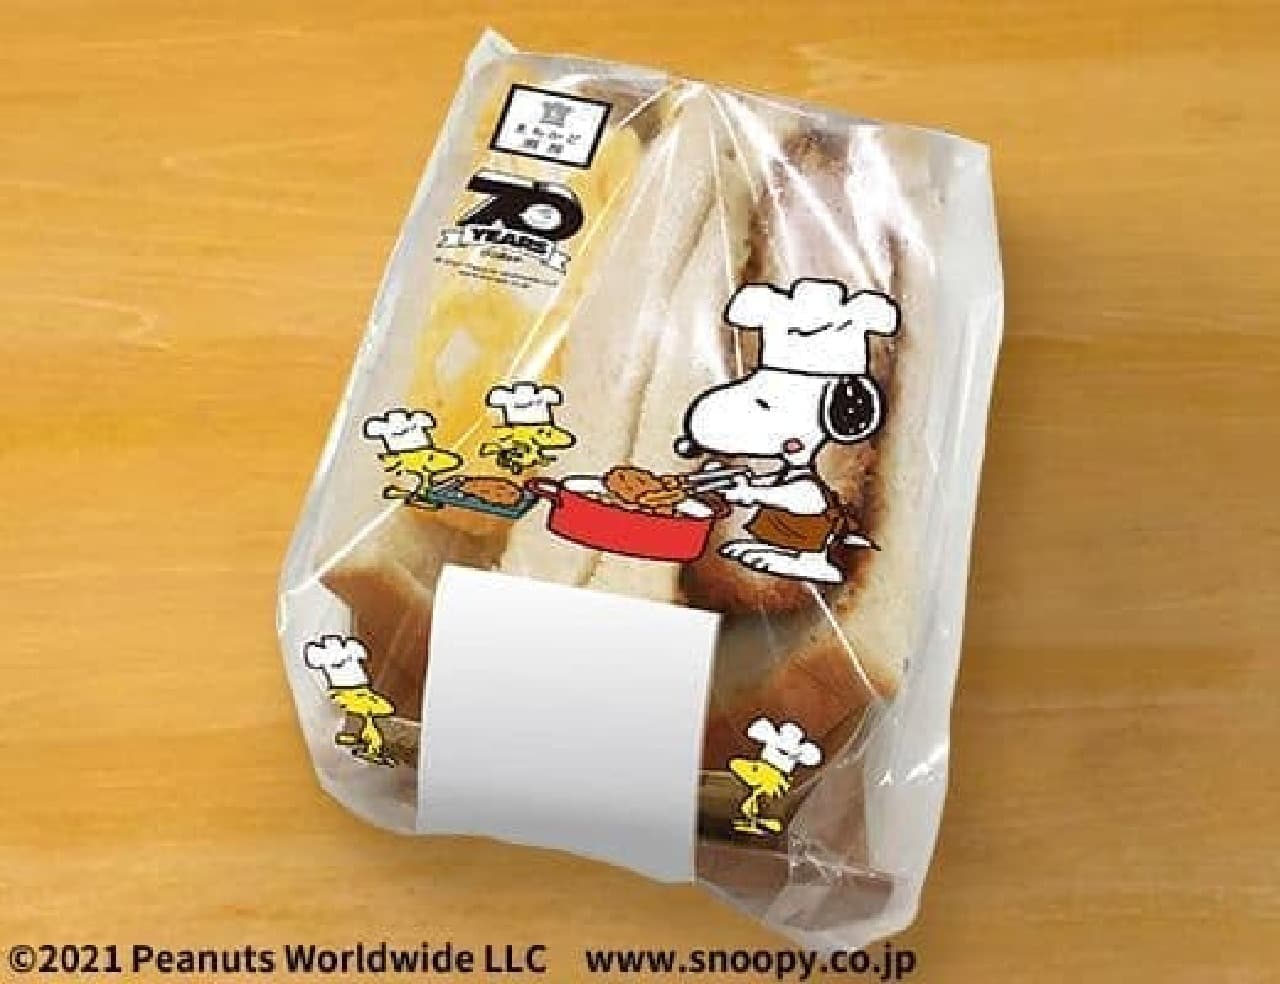 Lawson "Thick sliced cutlet & egg sandwich (Snoopy package)"